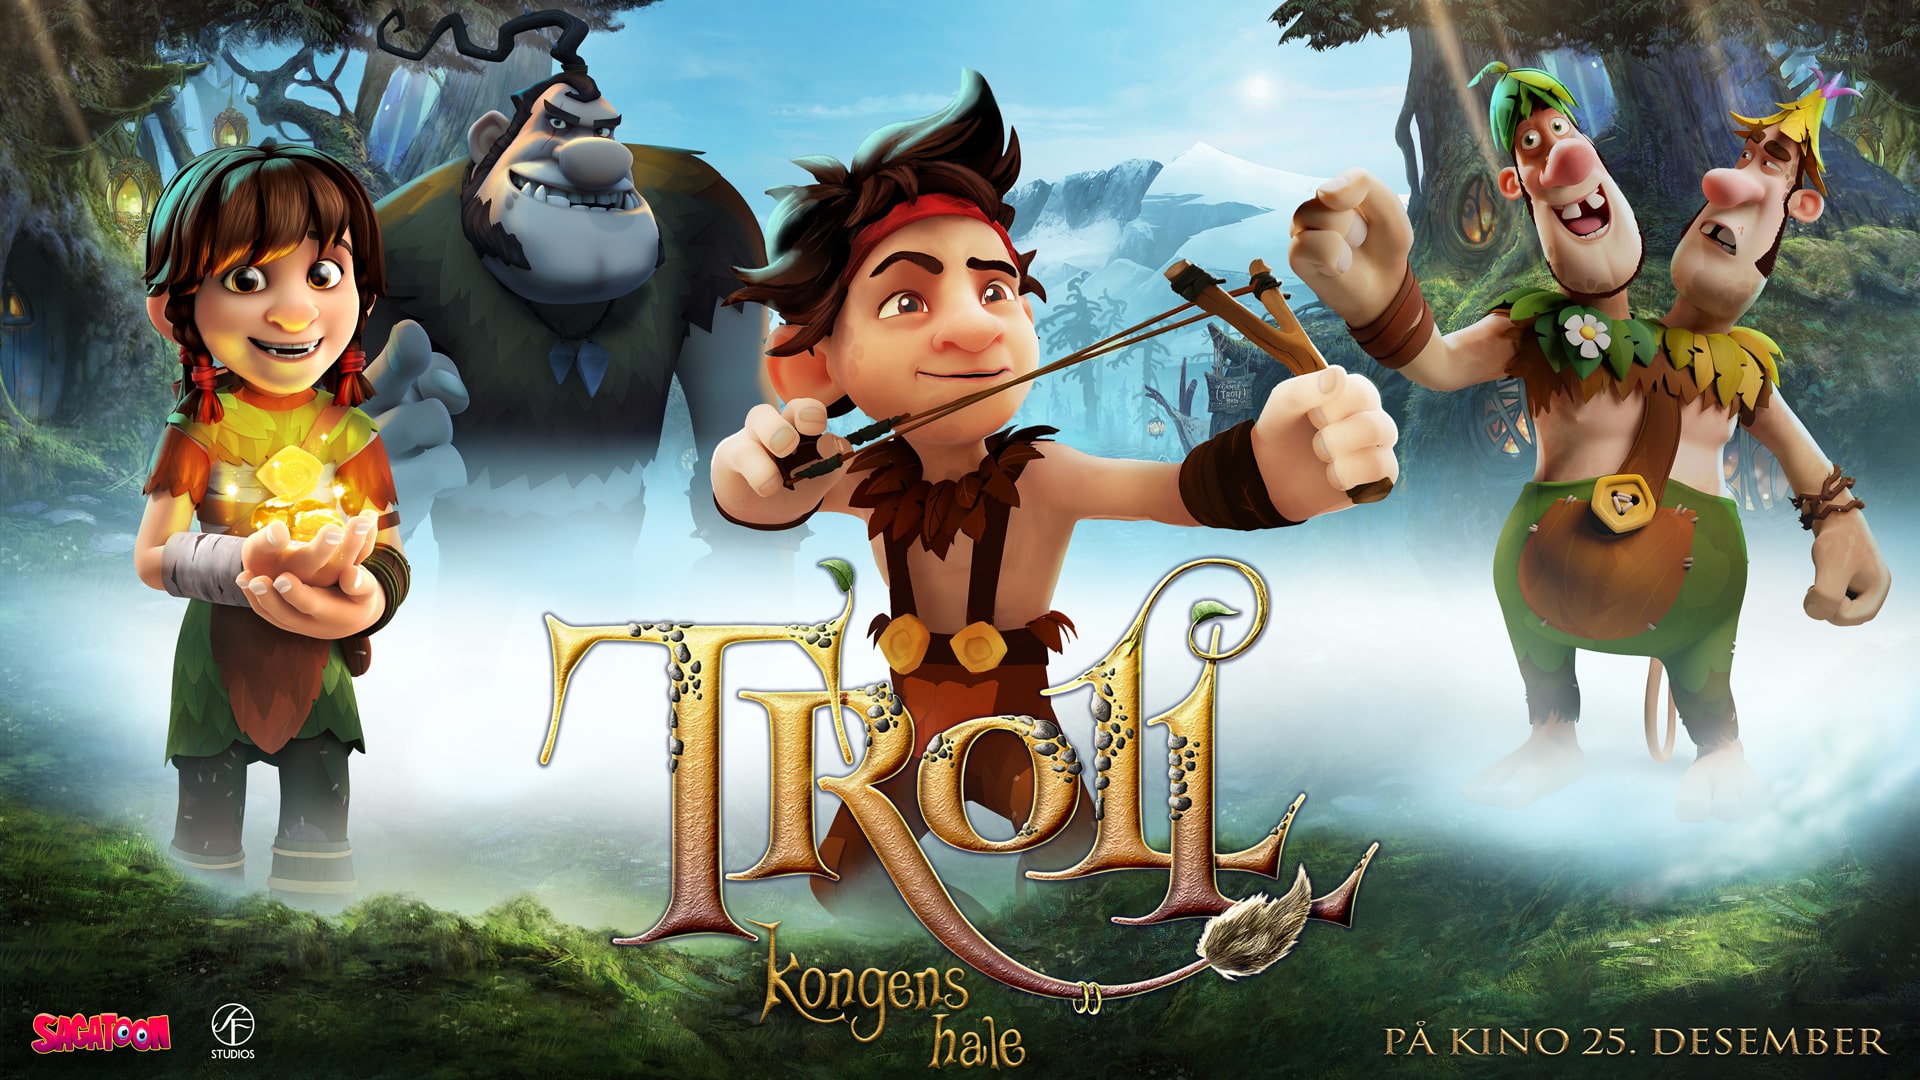 Trolls on the promotional poster for movie Troll kongens hale.